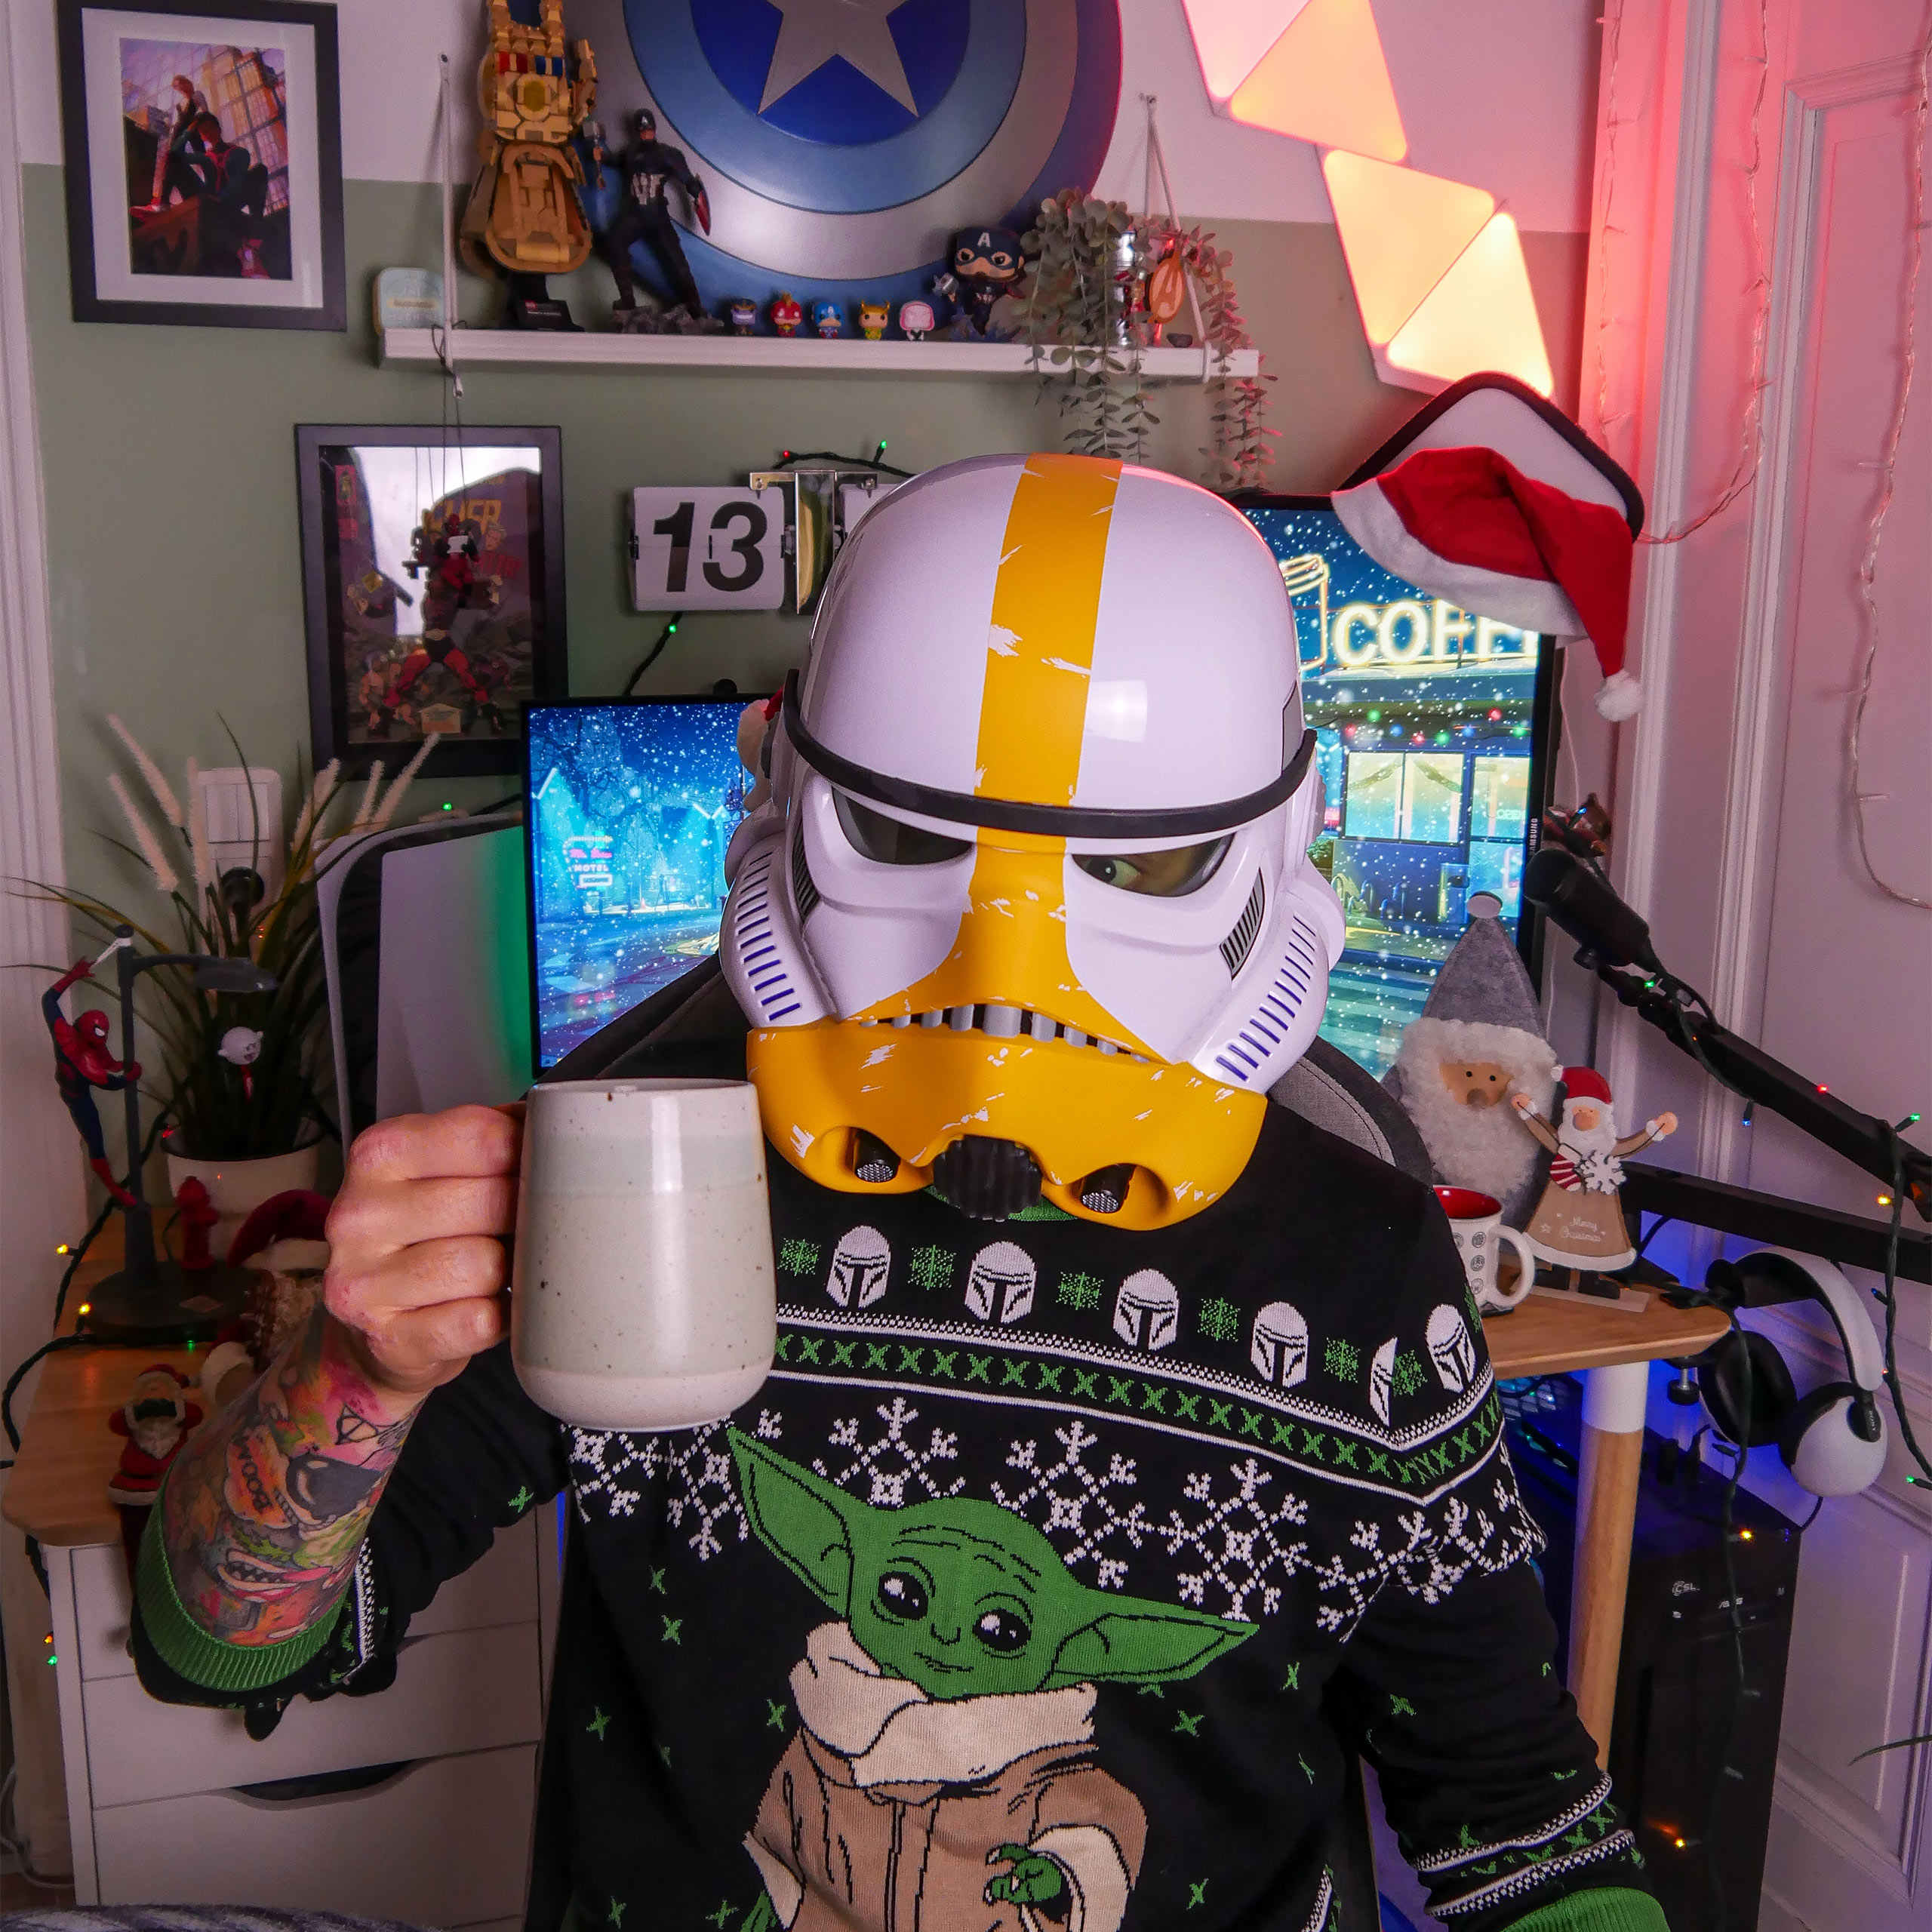 The Child Knitted Jumper - Star Wars The Mandalorian